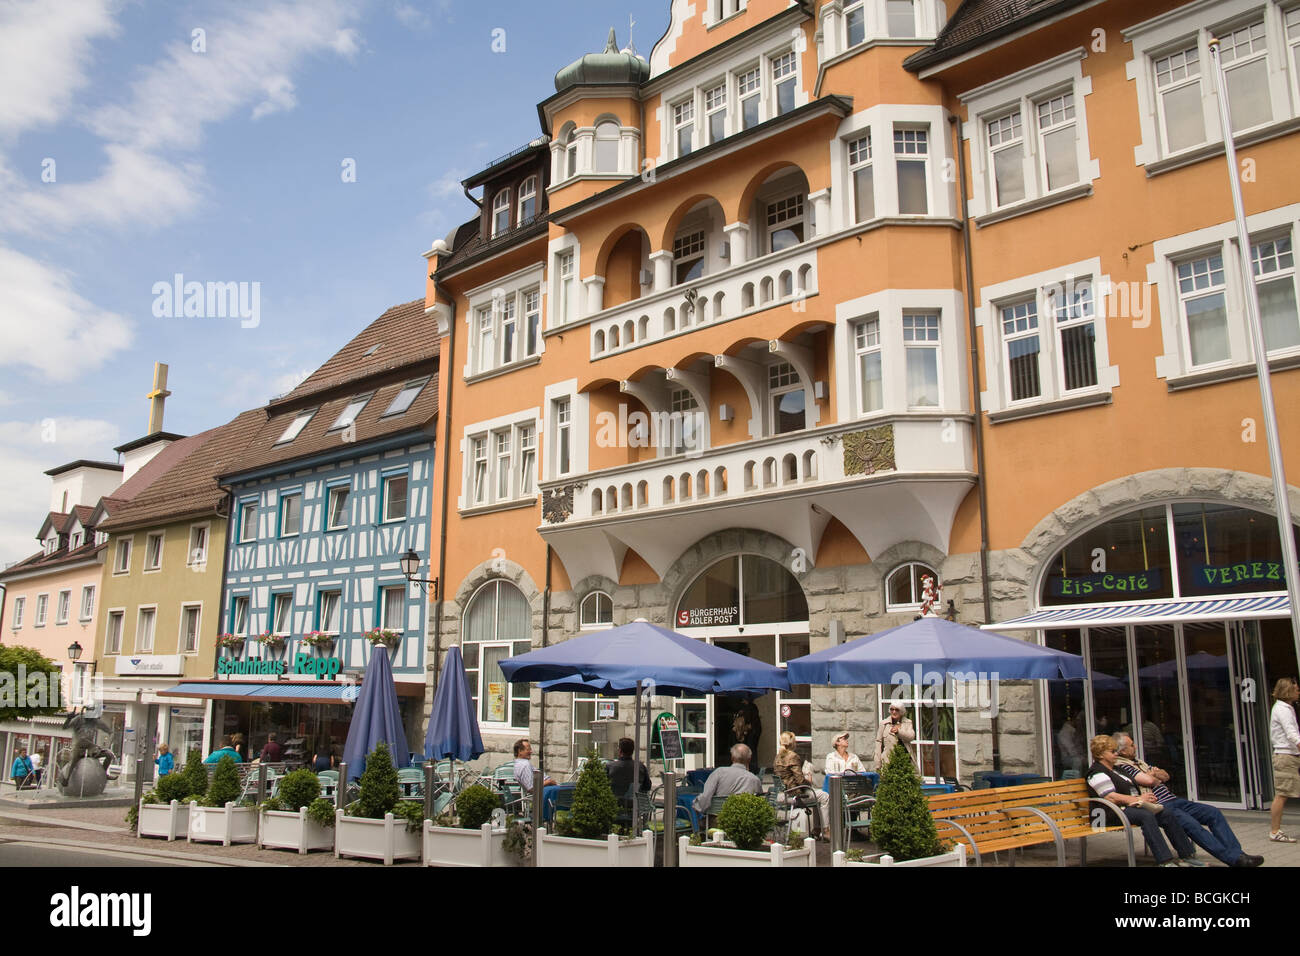 Stockach Baden Wurttenburg Germany EU Visitors in an outdoor cafe in this ancient town Stock Photo